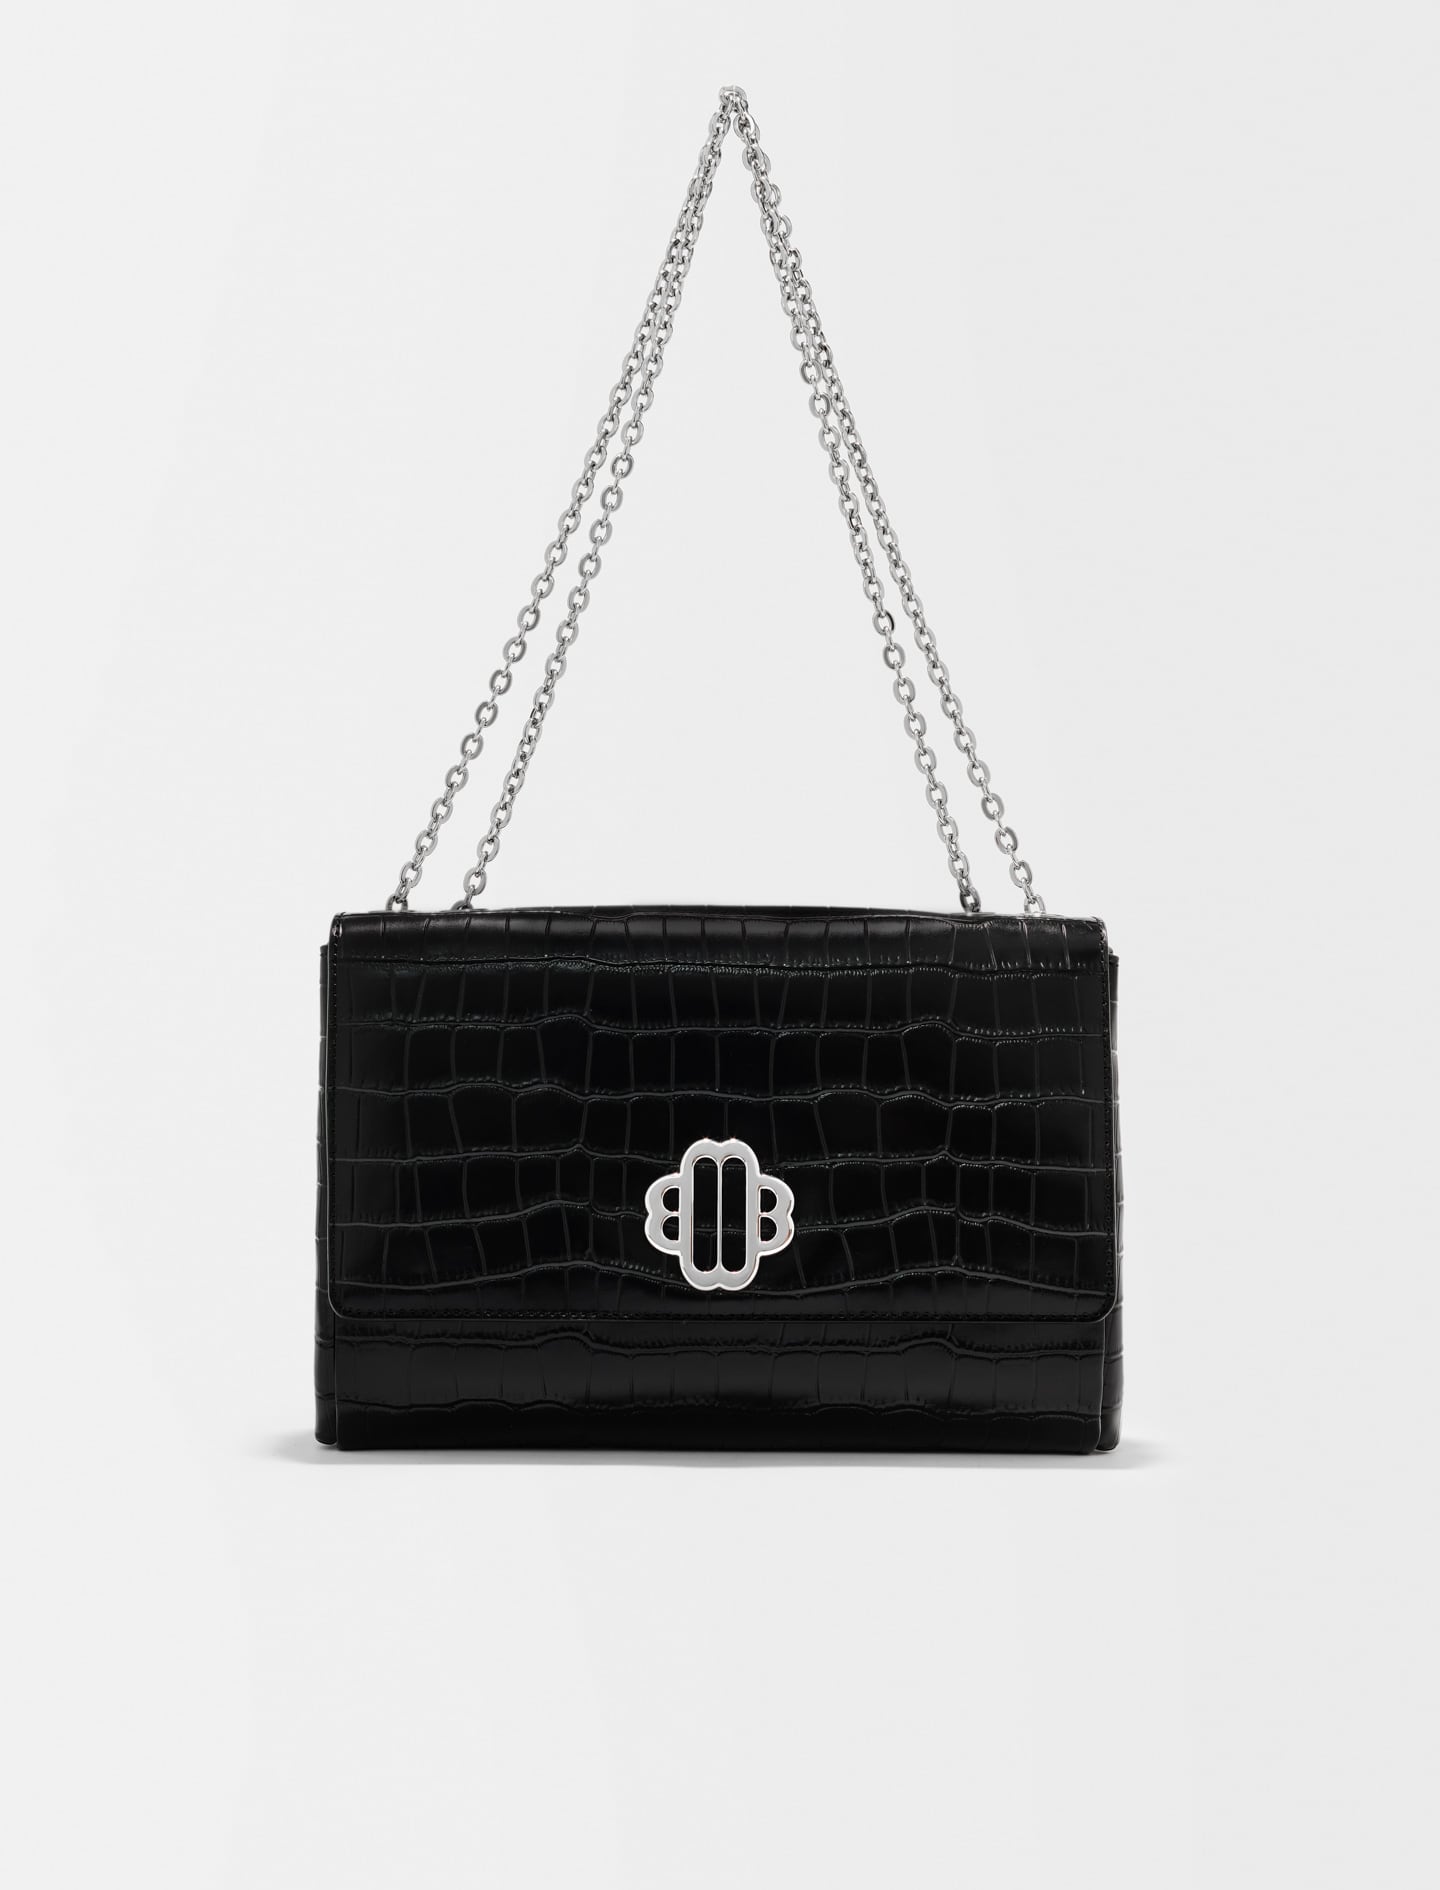 EMBOSSED LEATHER BAG WITH CHAIN